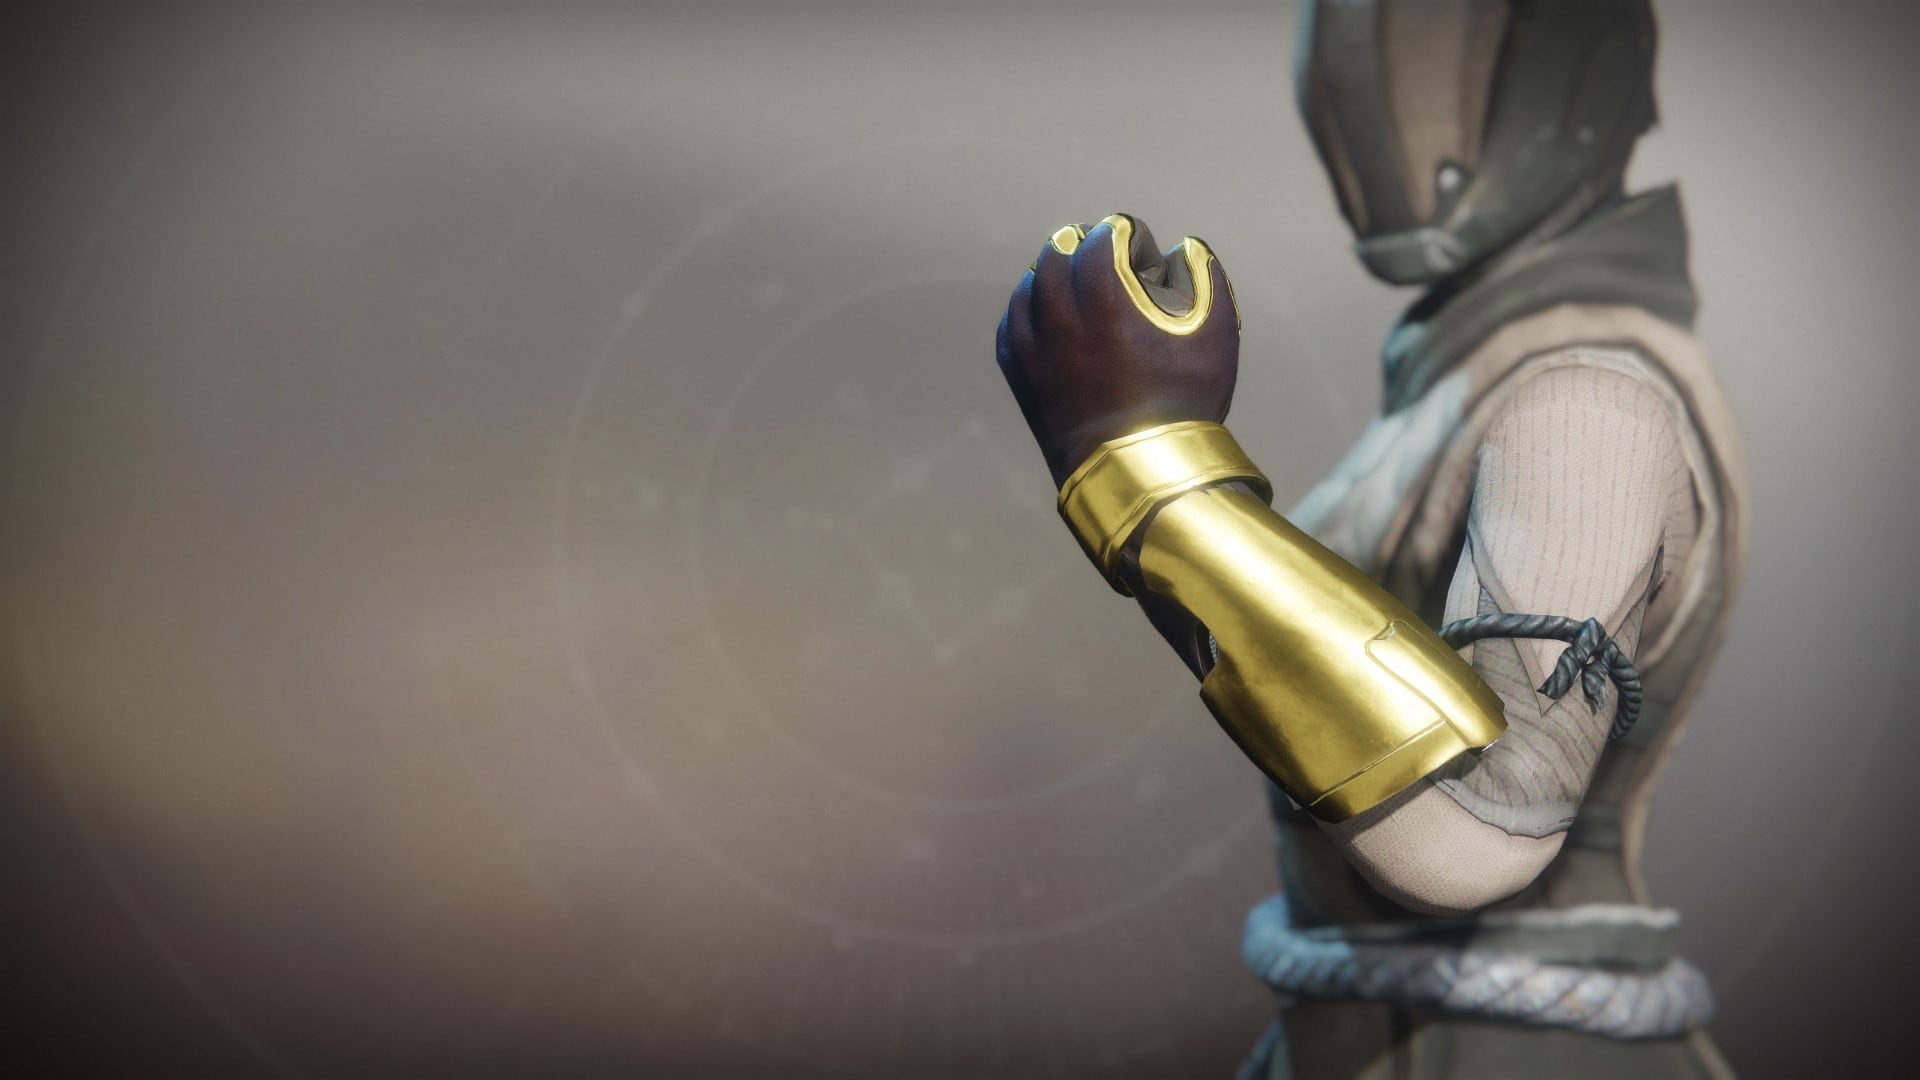 An in-game render of the Solstice Gloves (Majestic).